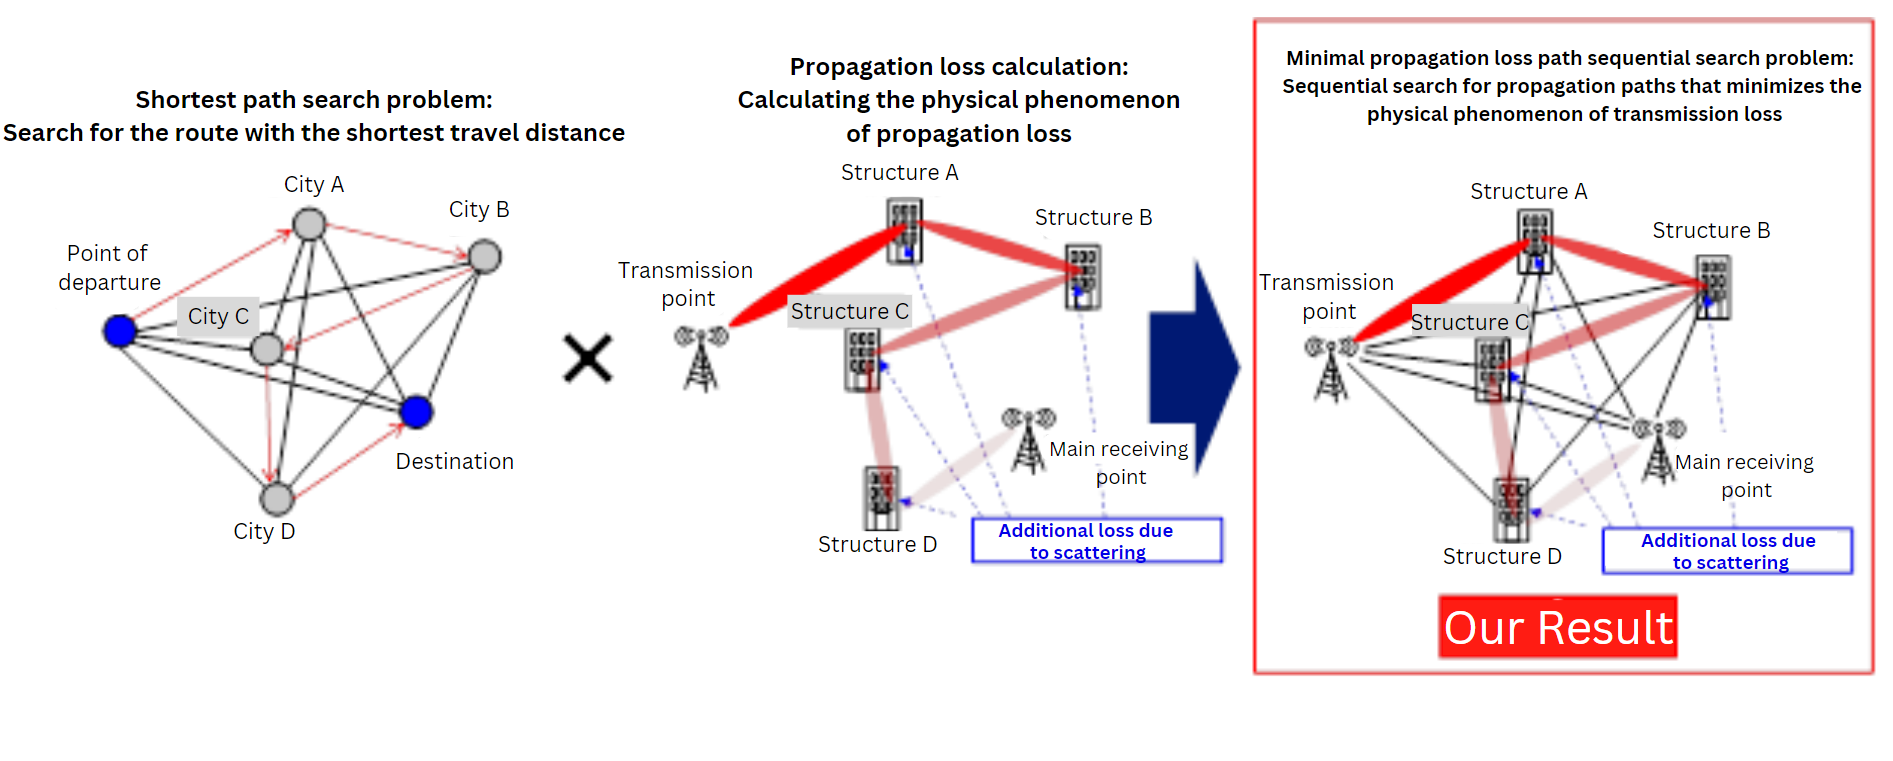 Fig. 1．Reducing calculations to the sequential search problem for minimal propagation loss paths